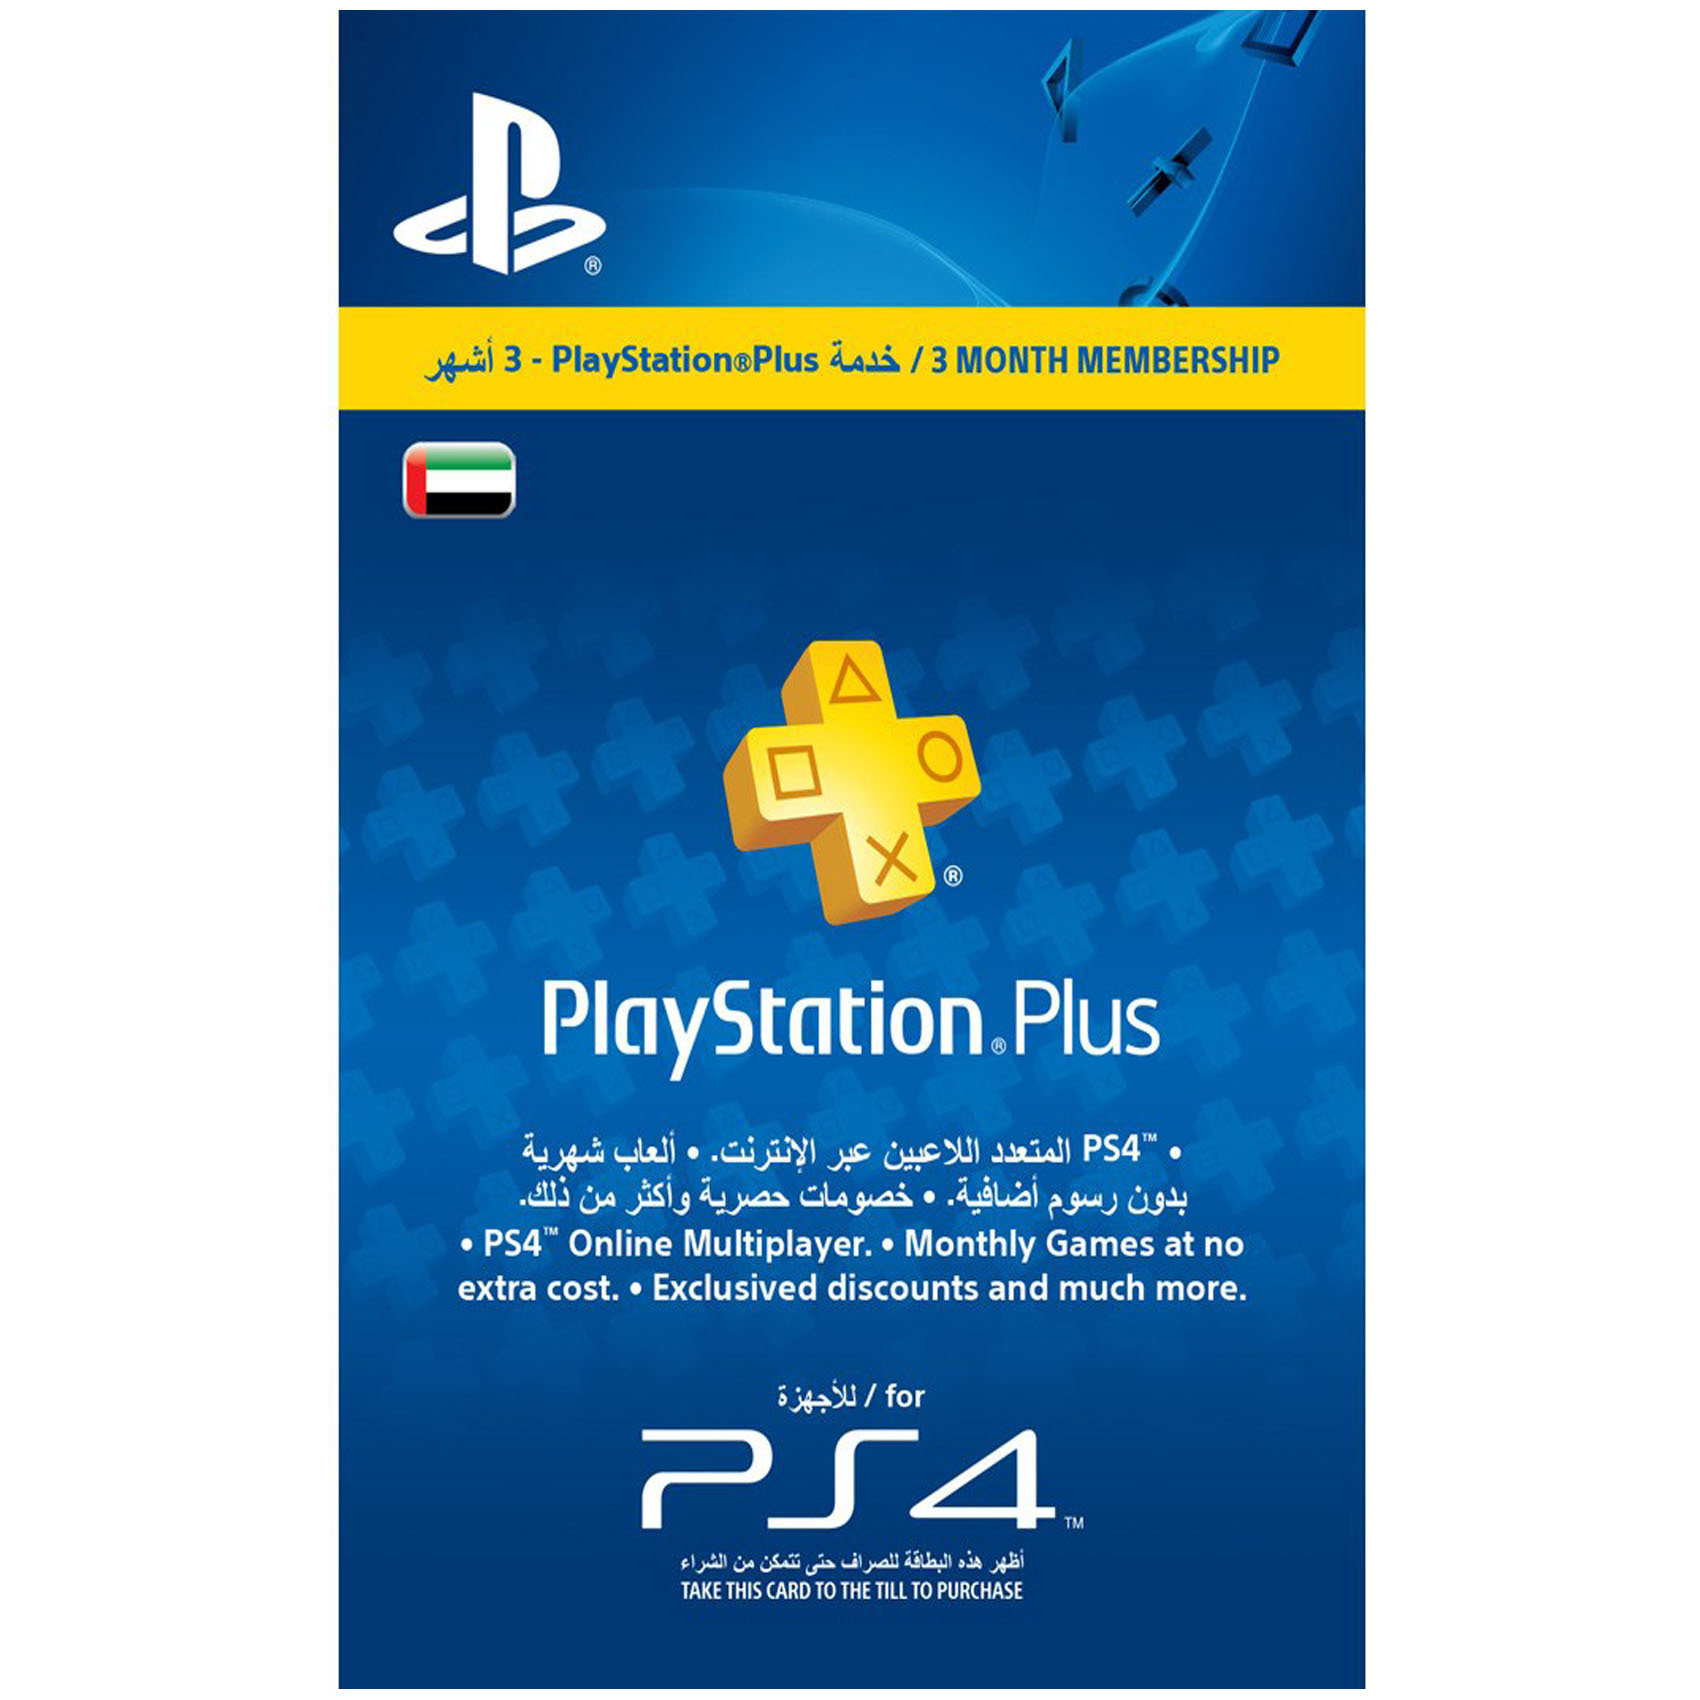 playstation plus monthly cost